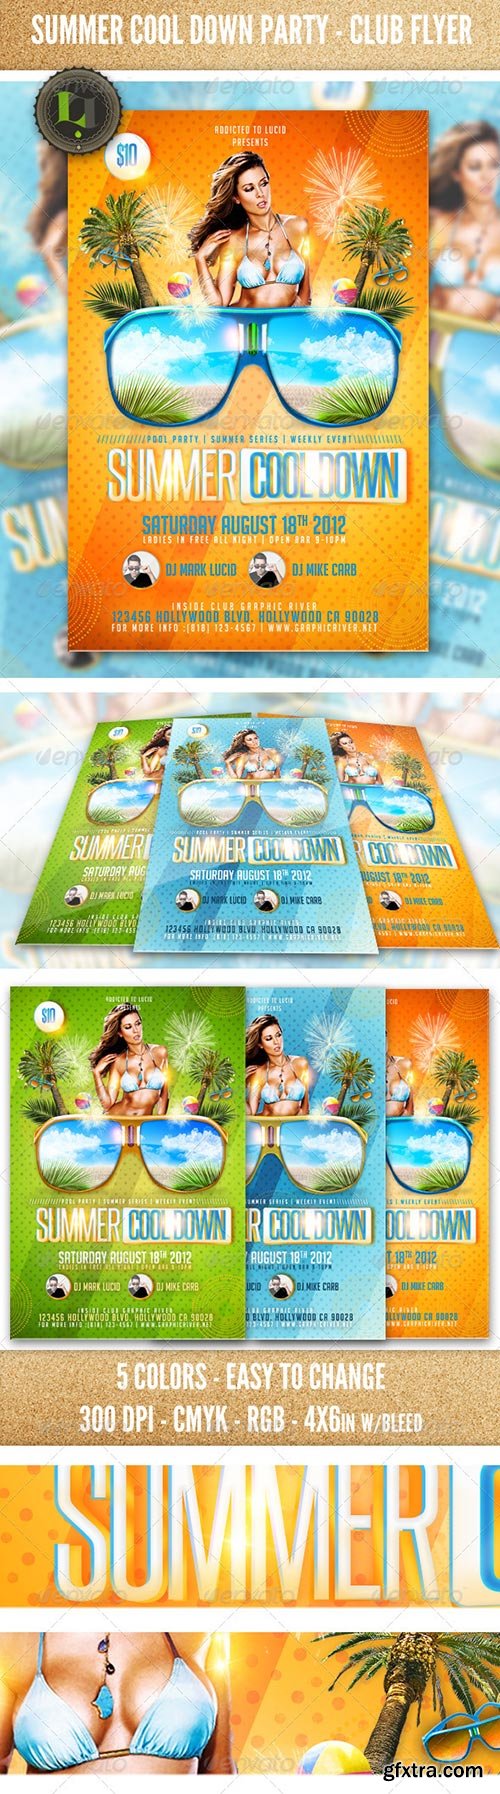 GraphicRiver - Summer Cool Down Party - Club Flyer